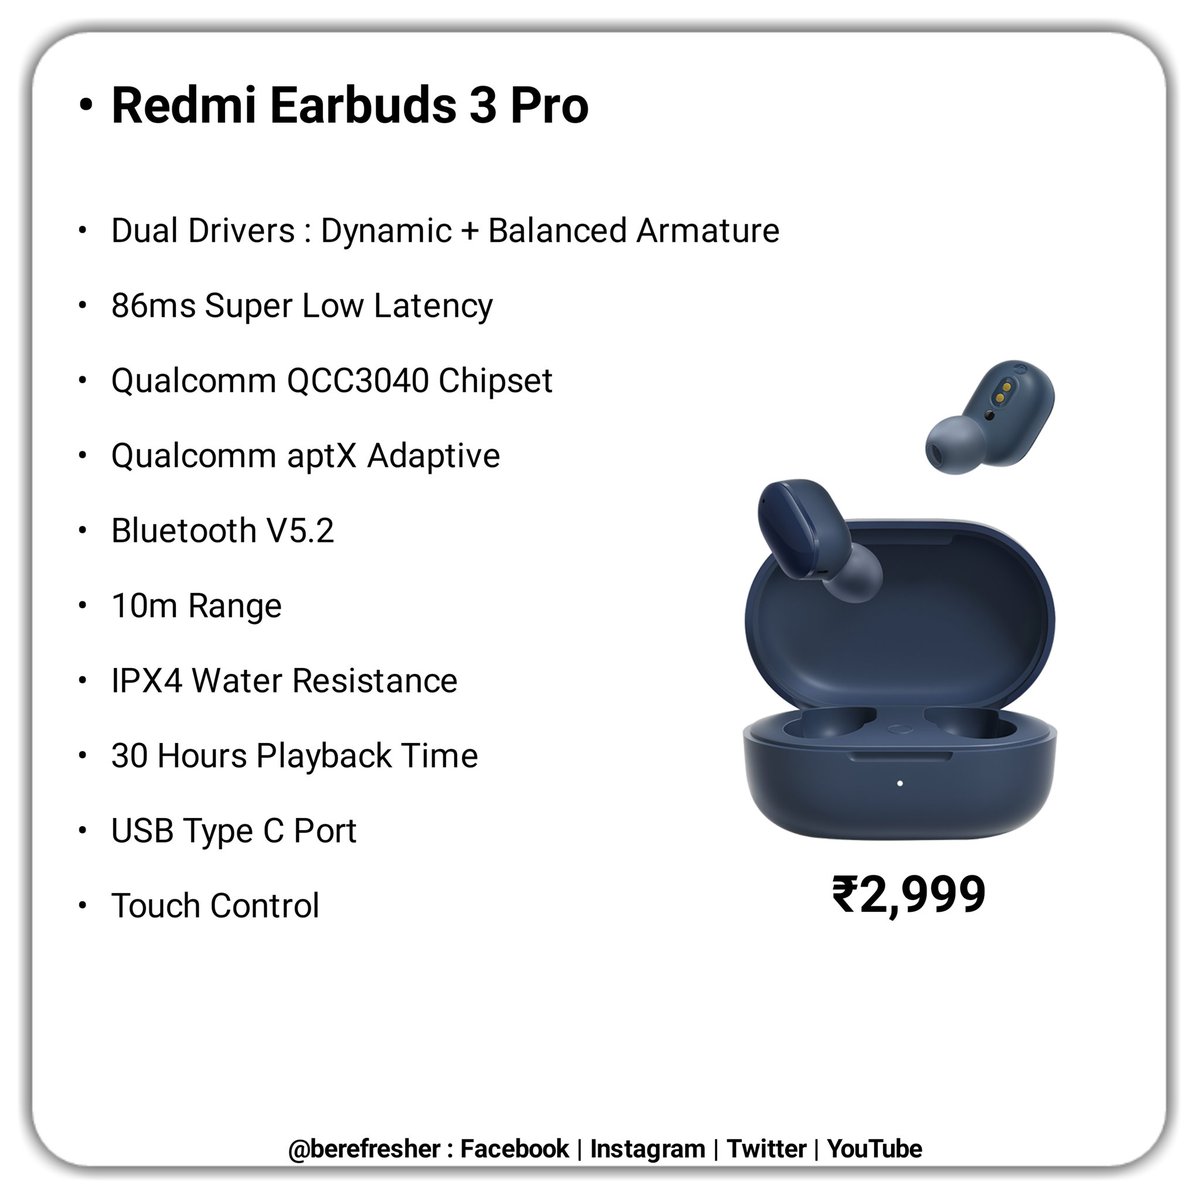 Redmi Earbuds 3 Pro launched in India 
.
@RedmiIndia 
.
#RedmiEarbuds3Pro #RedmiEarbuds #Redmi #RedmiIndia #Earbuds #BeRefresher